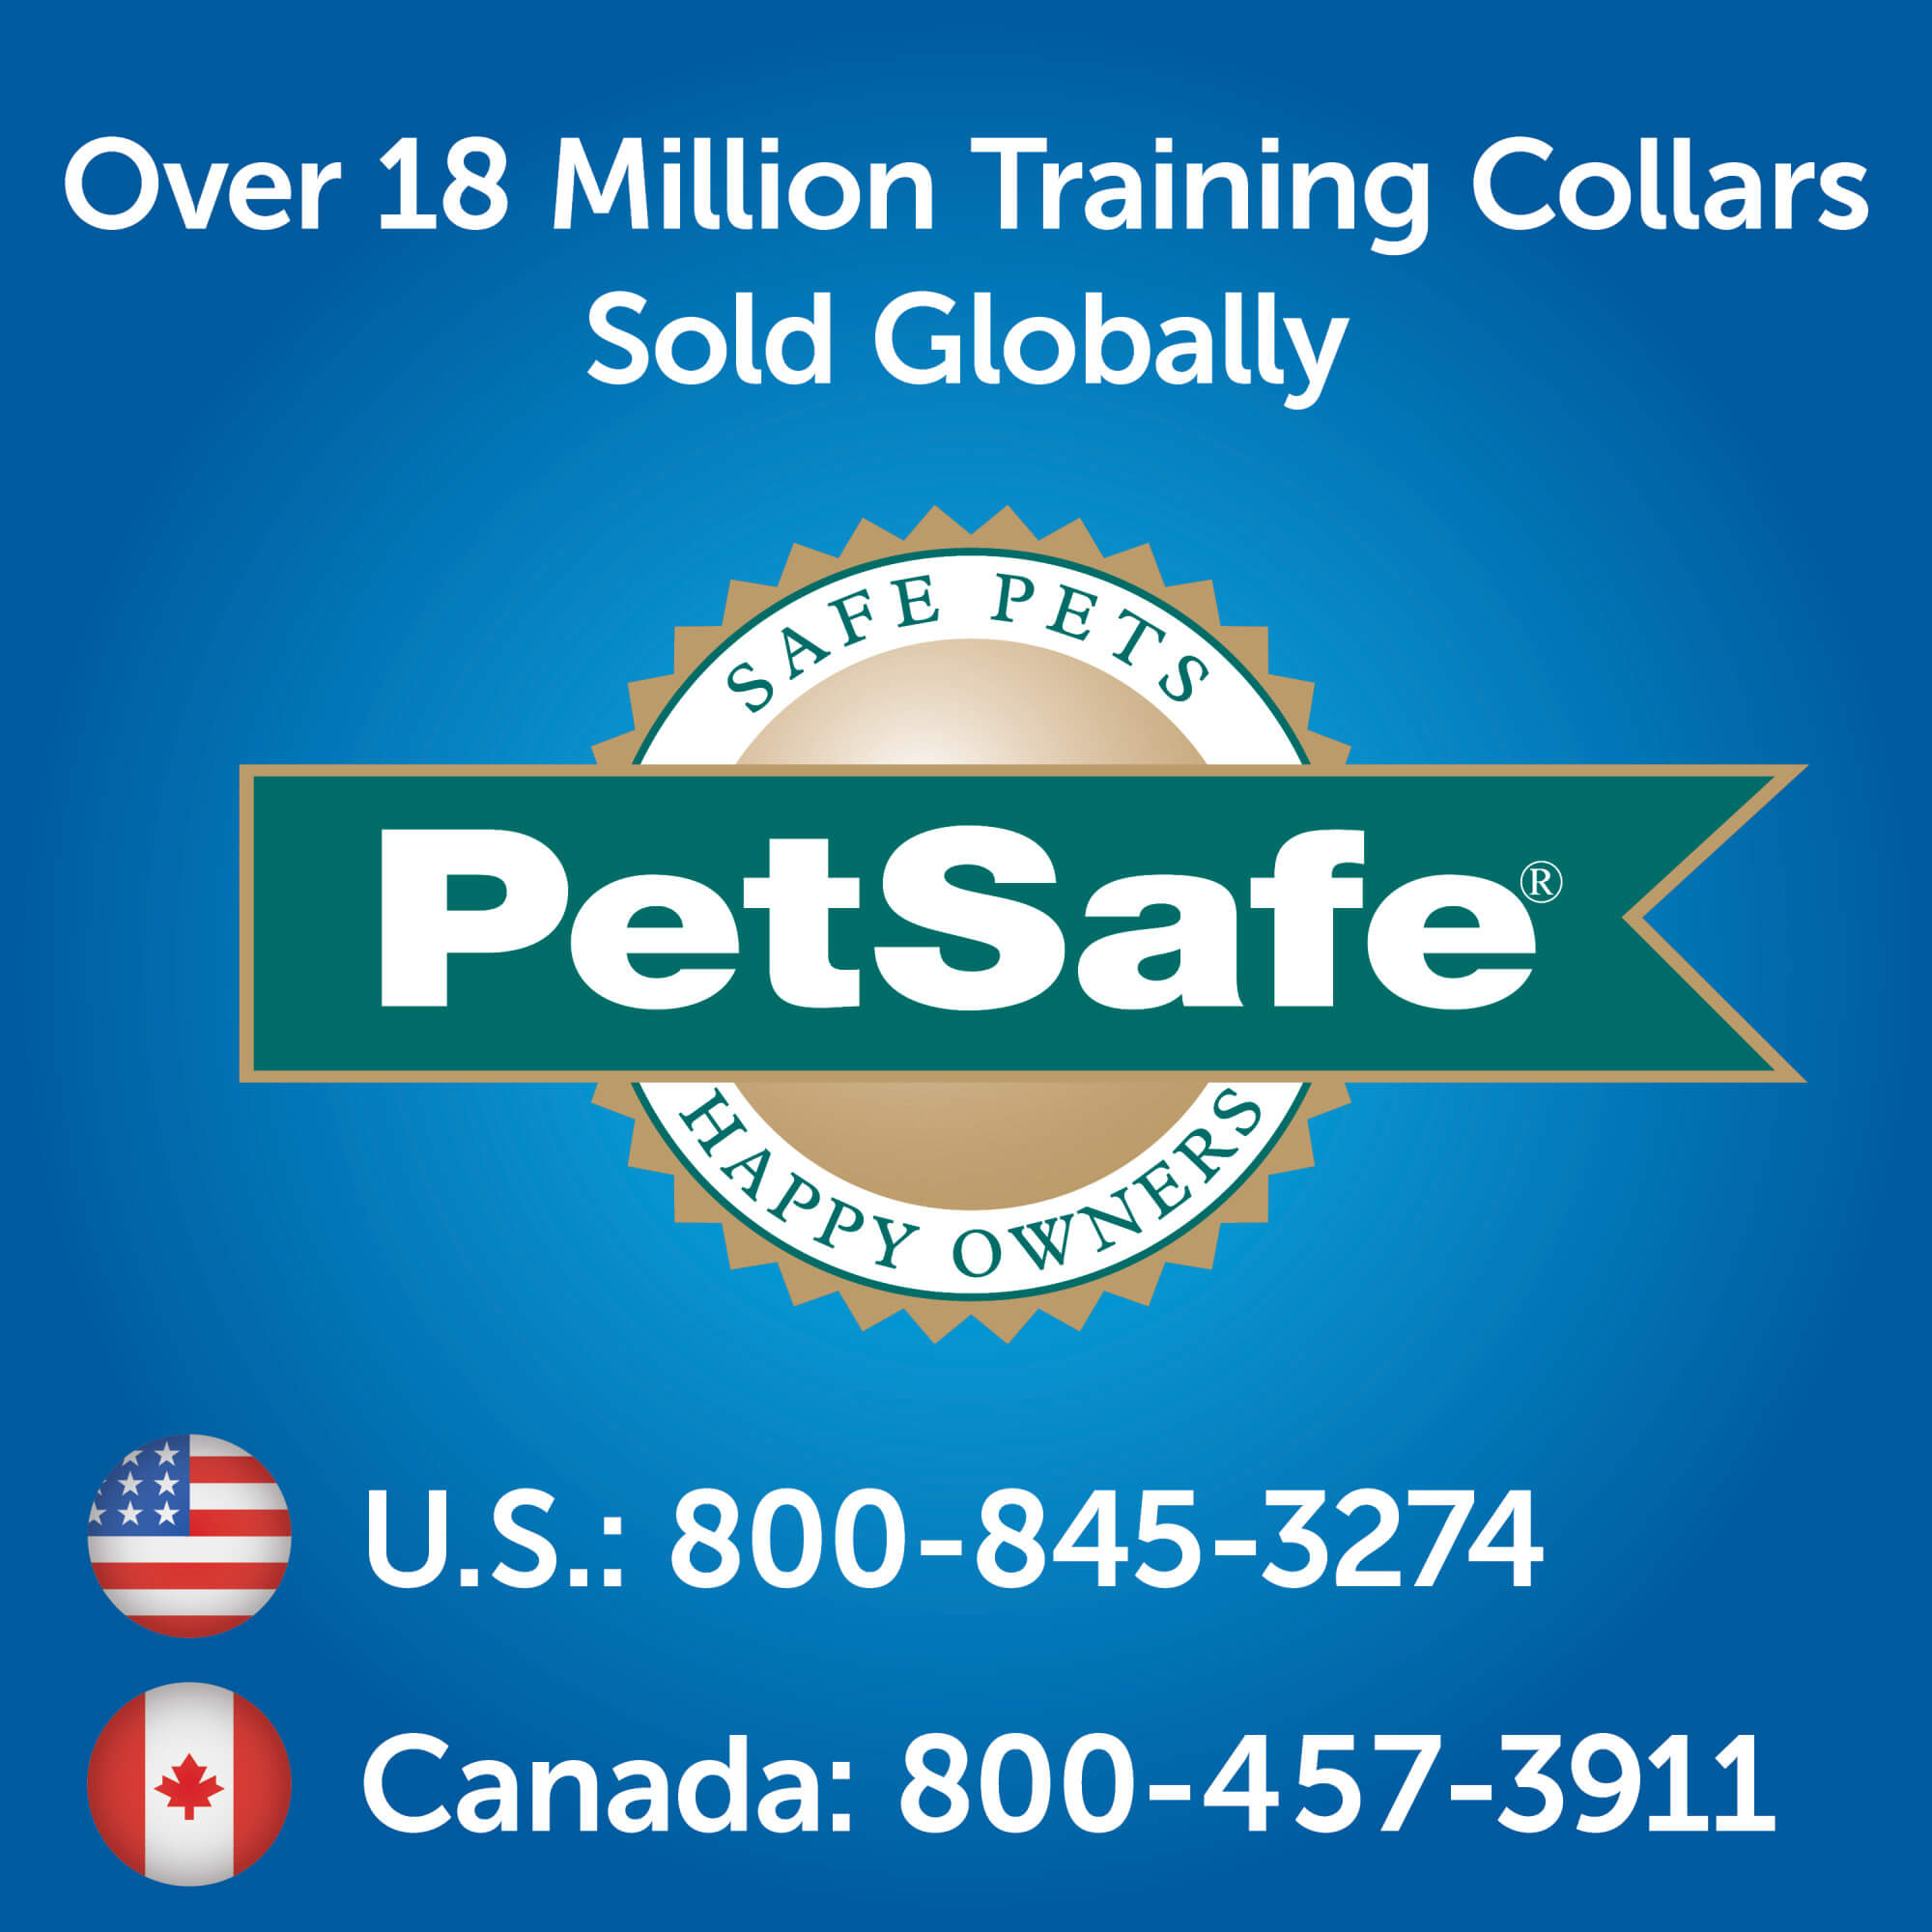 Over 18 million training collars sold globally